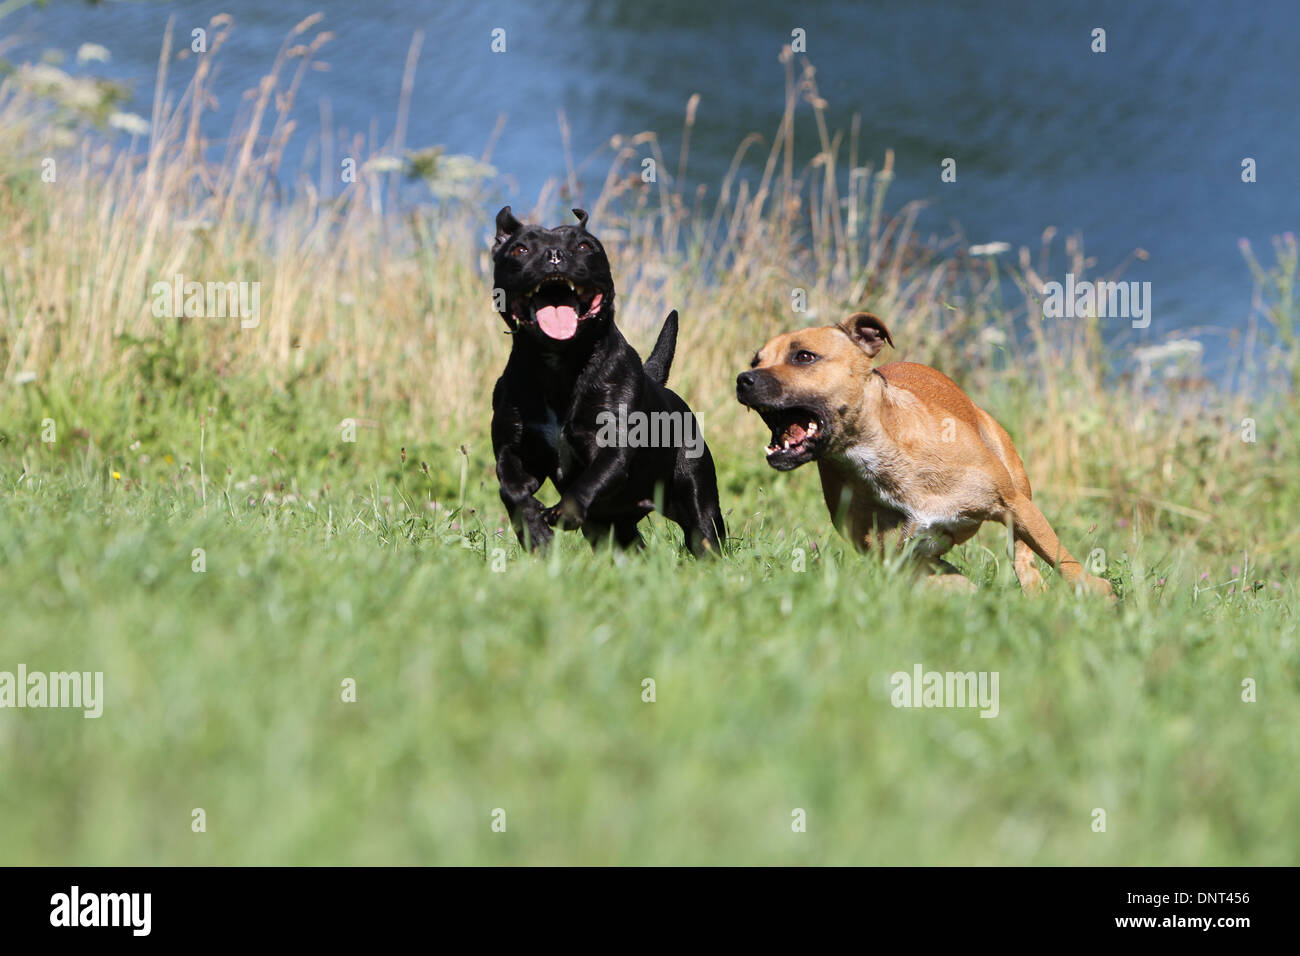 dog Staffordshire Bull Terrier / Staffie  /  two adults running in a meadow Stock Photo